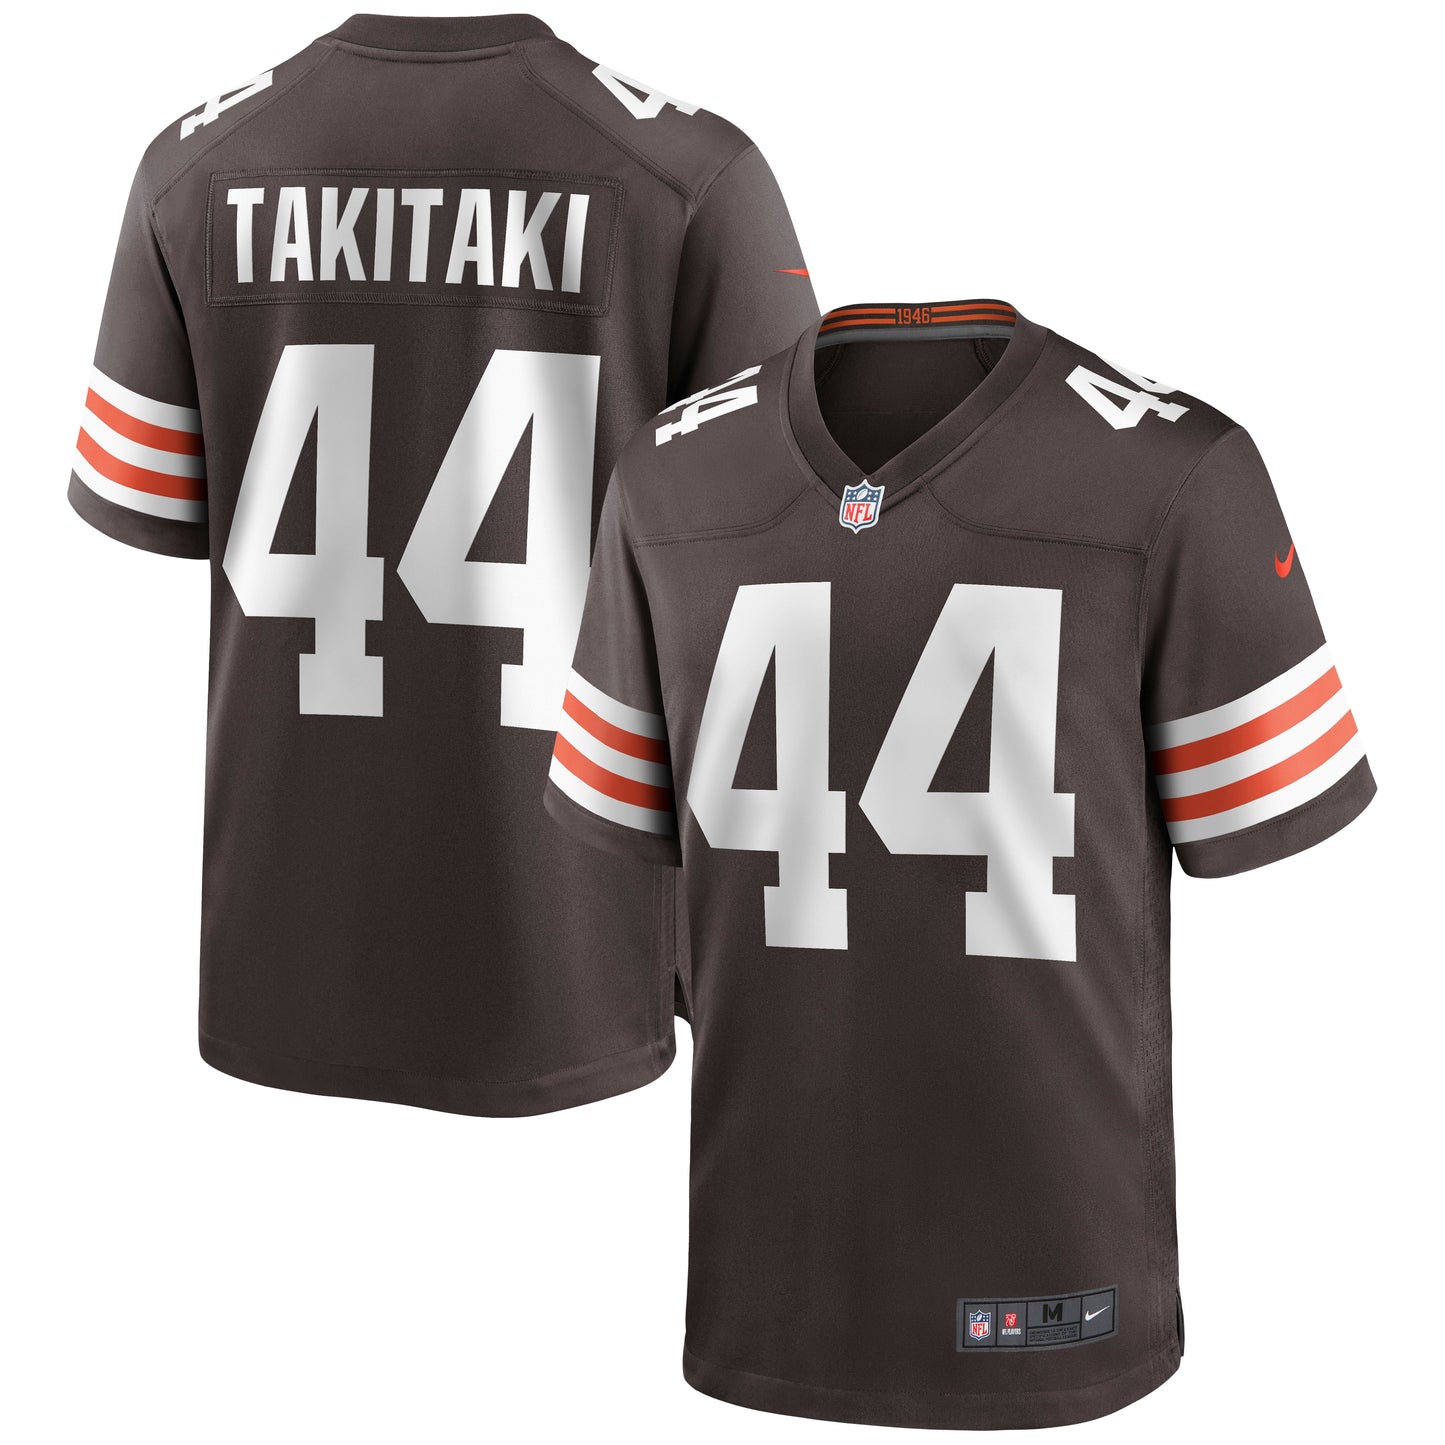 Sione Takitaki Cleveland Browns Nike Game Jersey - Brown